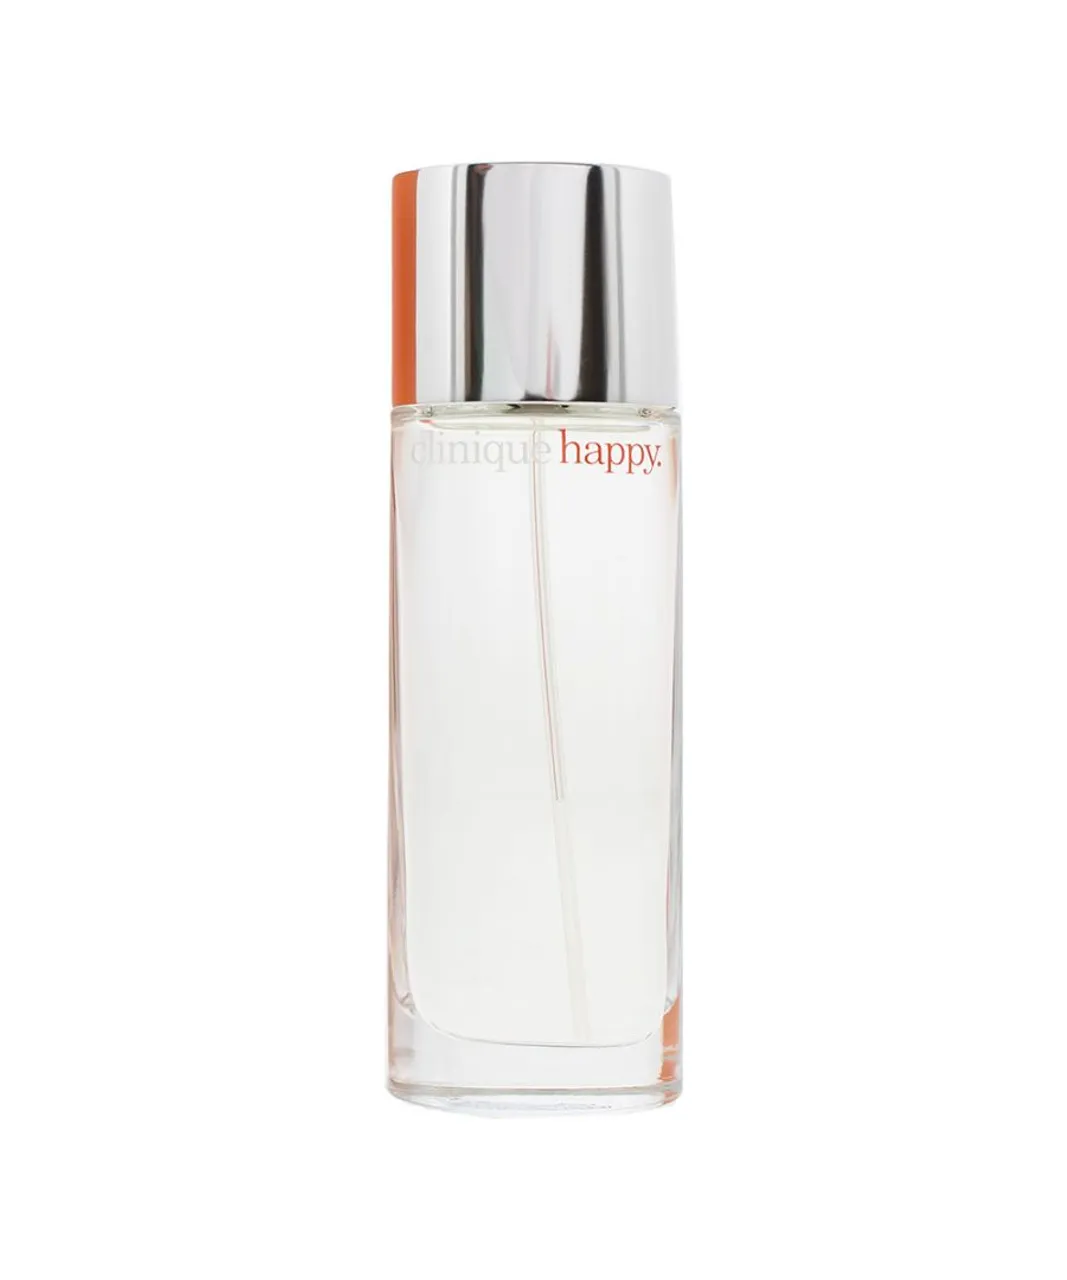 Clinique Womens Happy Perfume Spray 50ml For Her - Apple - One Size